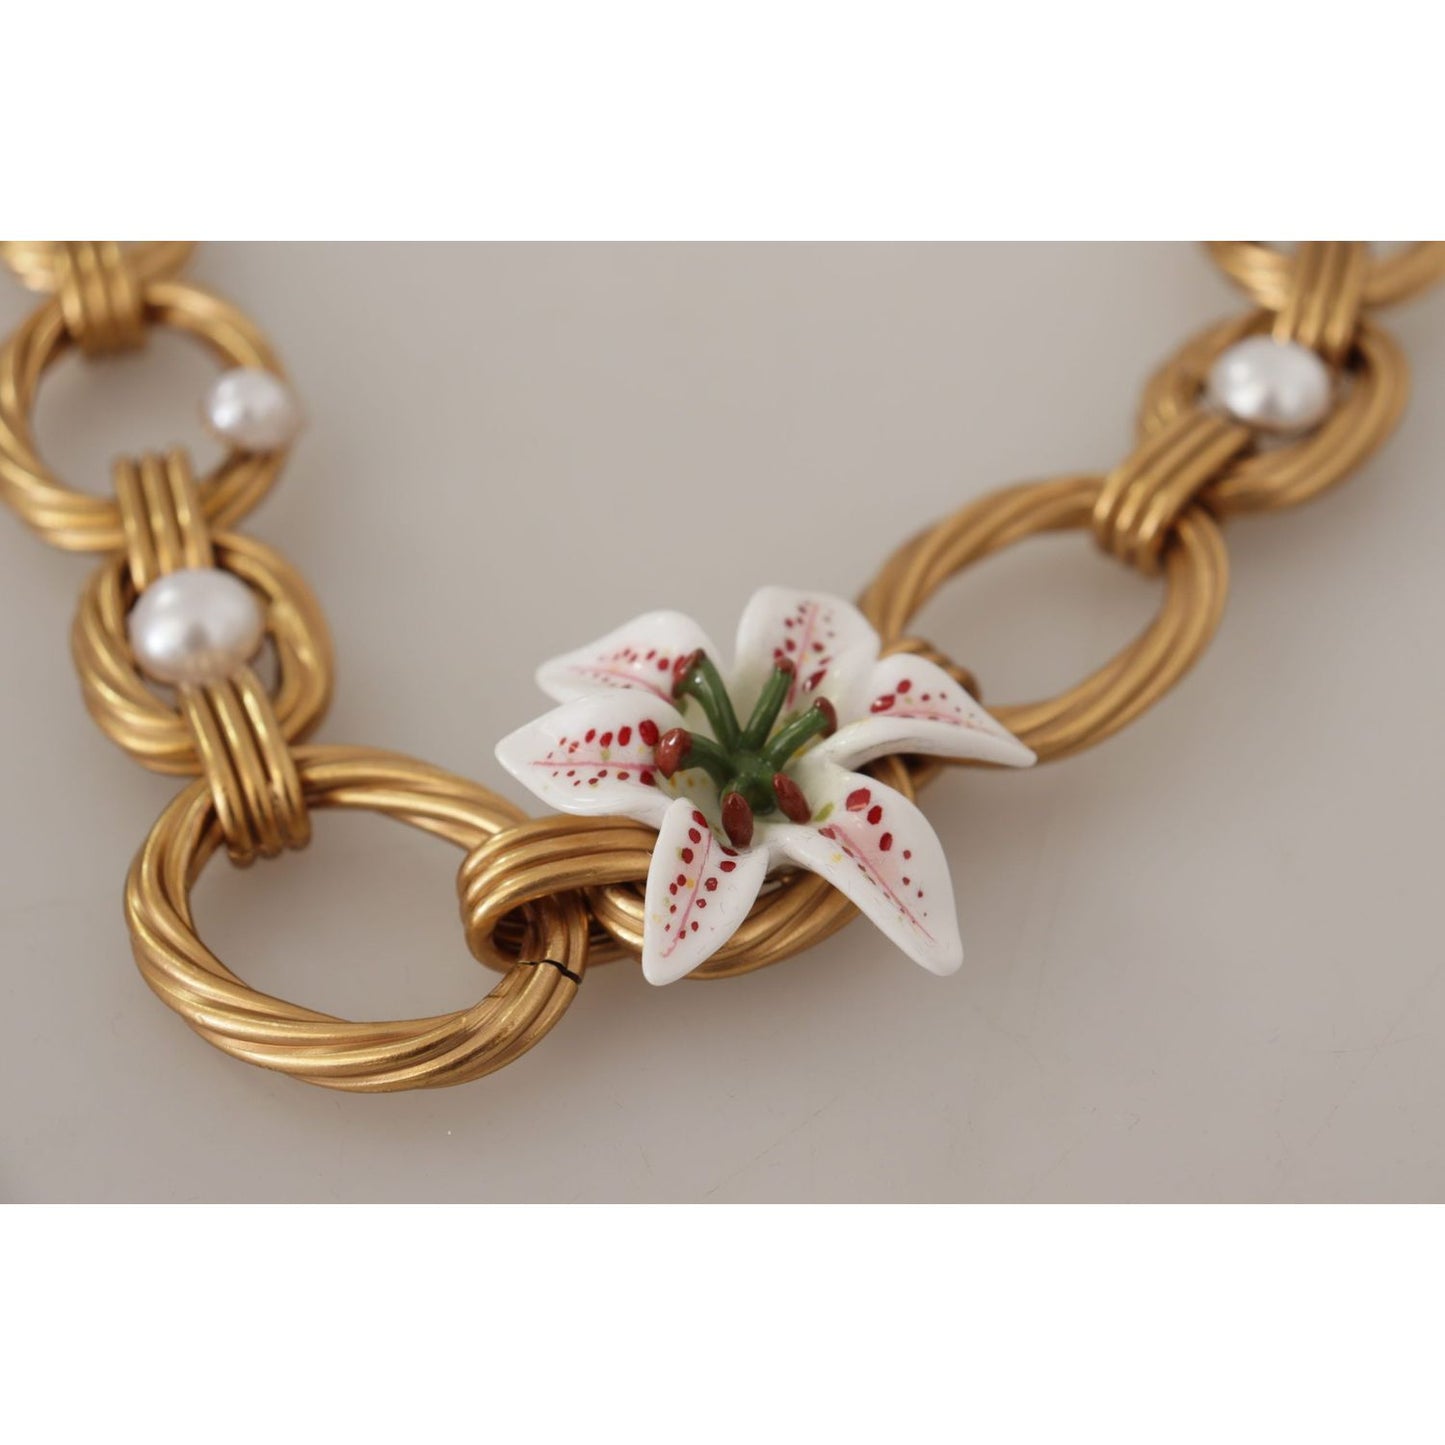 Dolce & Gabbana Elegant Gold Lilly Flower Pendant Necklace WOMAN NECKLACE gold-white-lily-floral-chain-statement-necklace